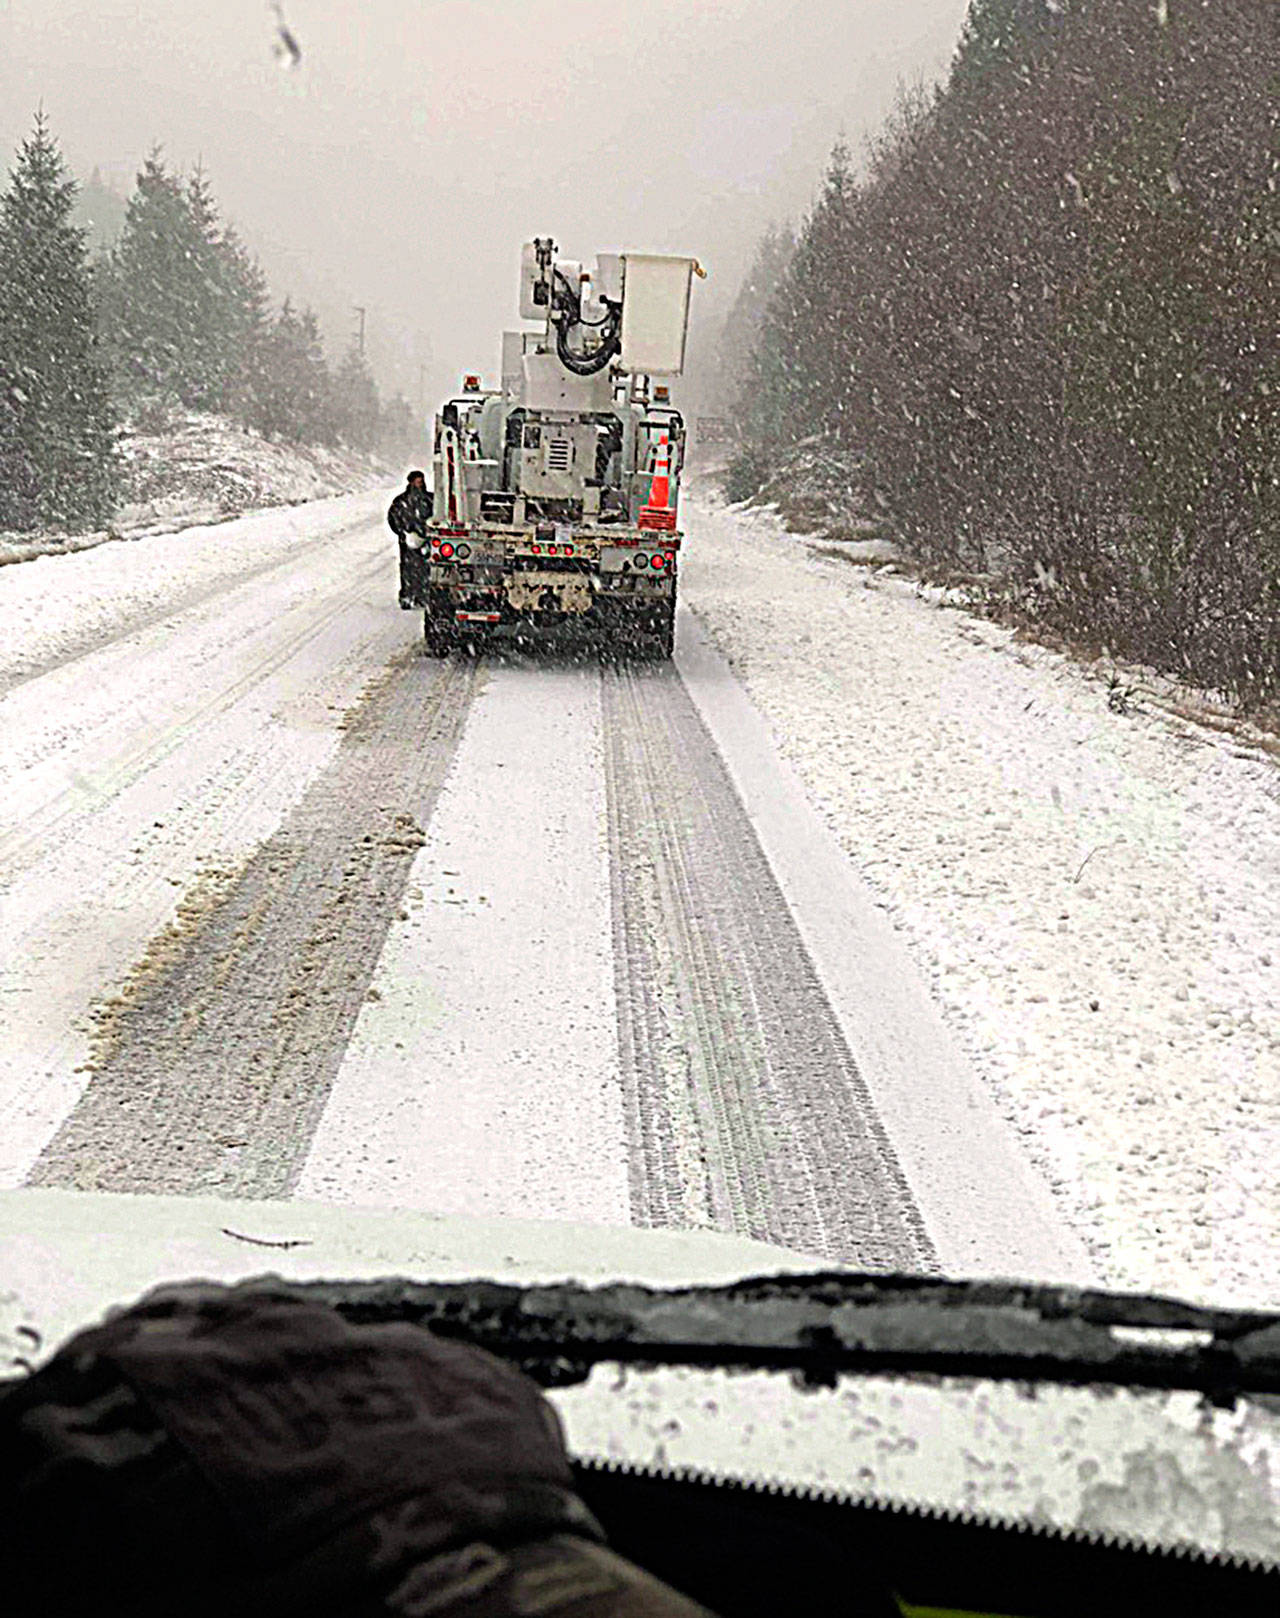 Grays Harbor PUD crews dealt with daunting conditions Saturday as they responded to more than 100 reports of downed lines and power outages over the weekend. (Courtesy GHPUD)